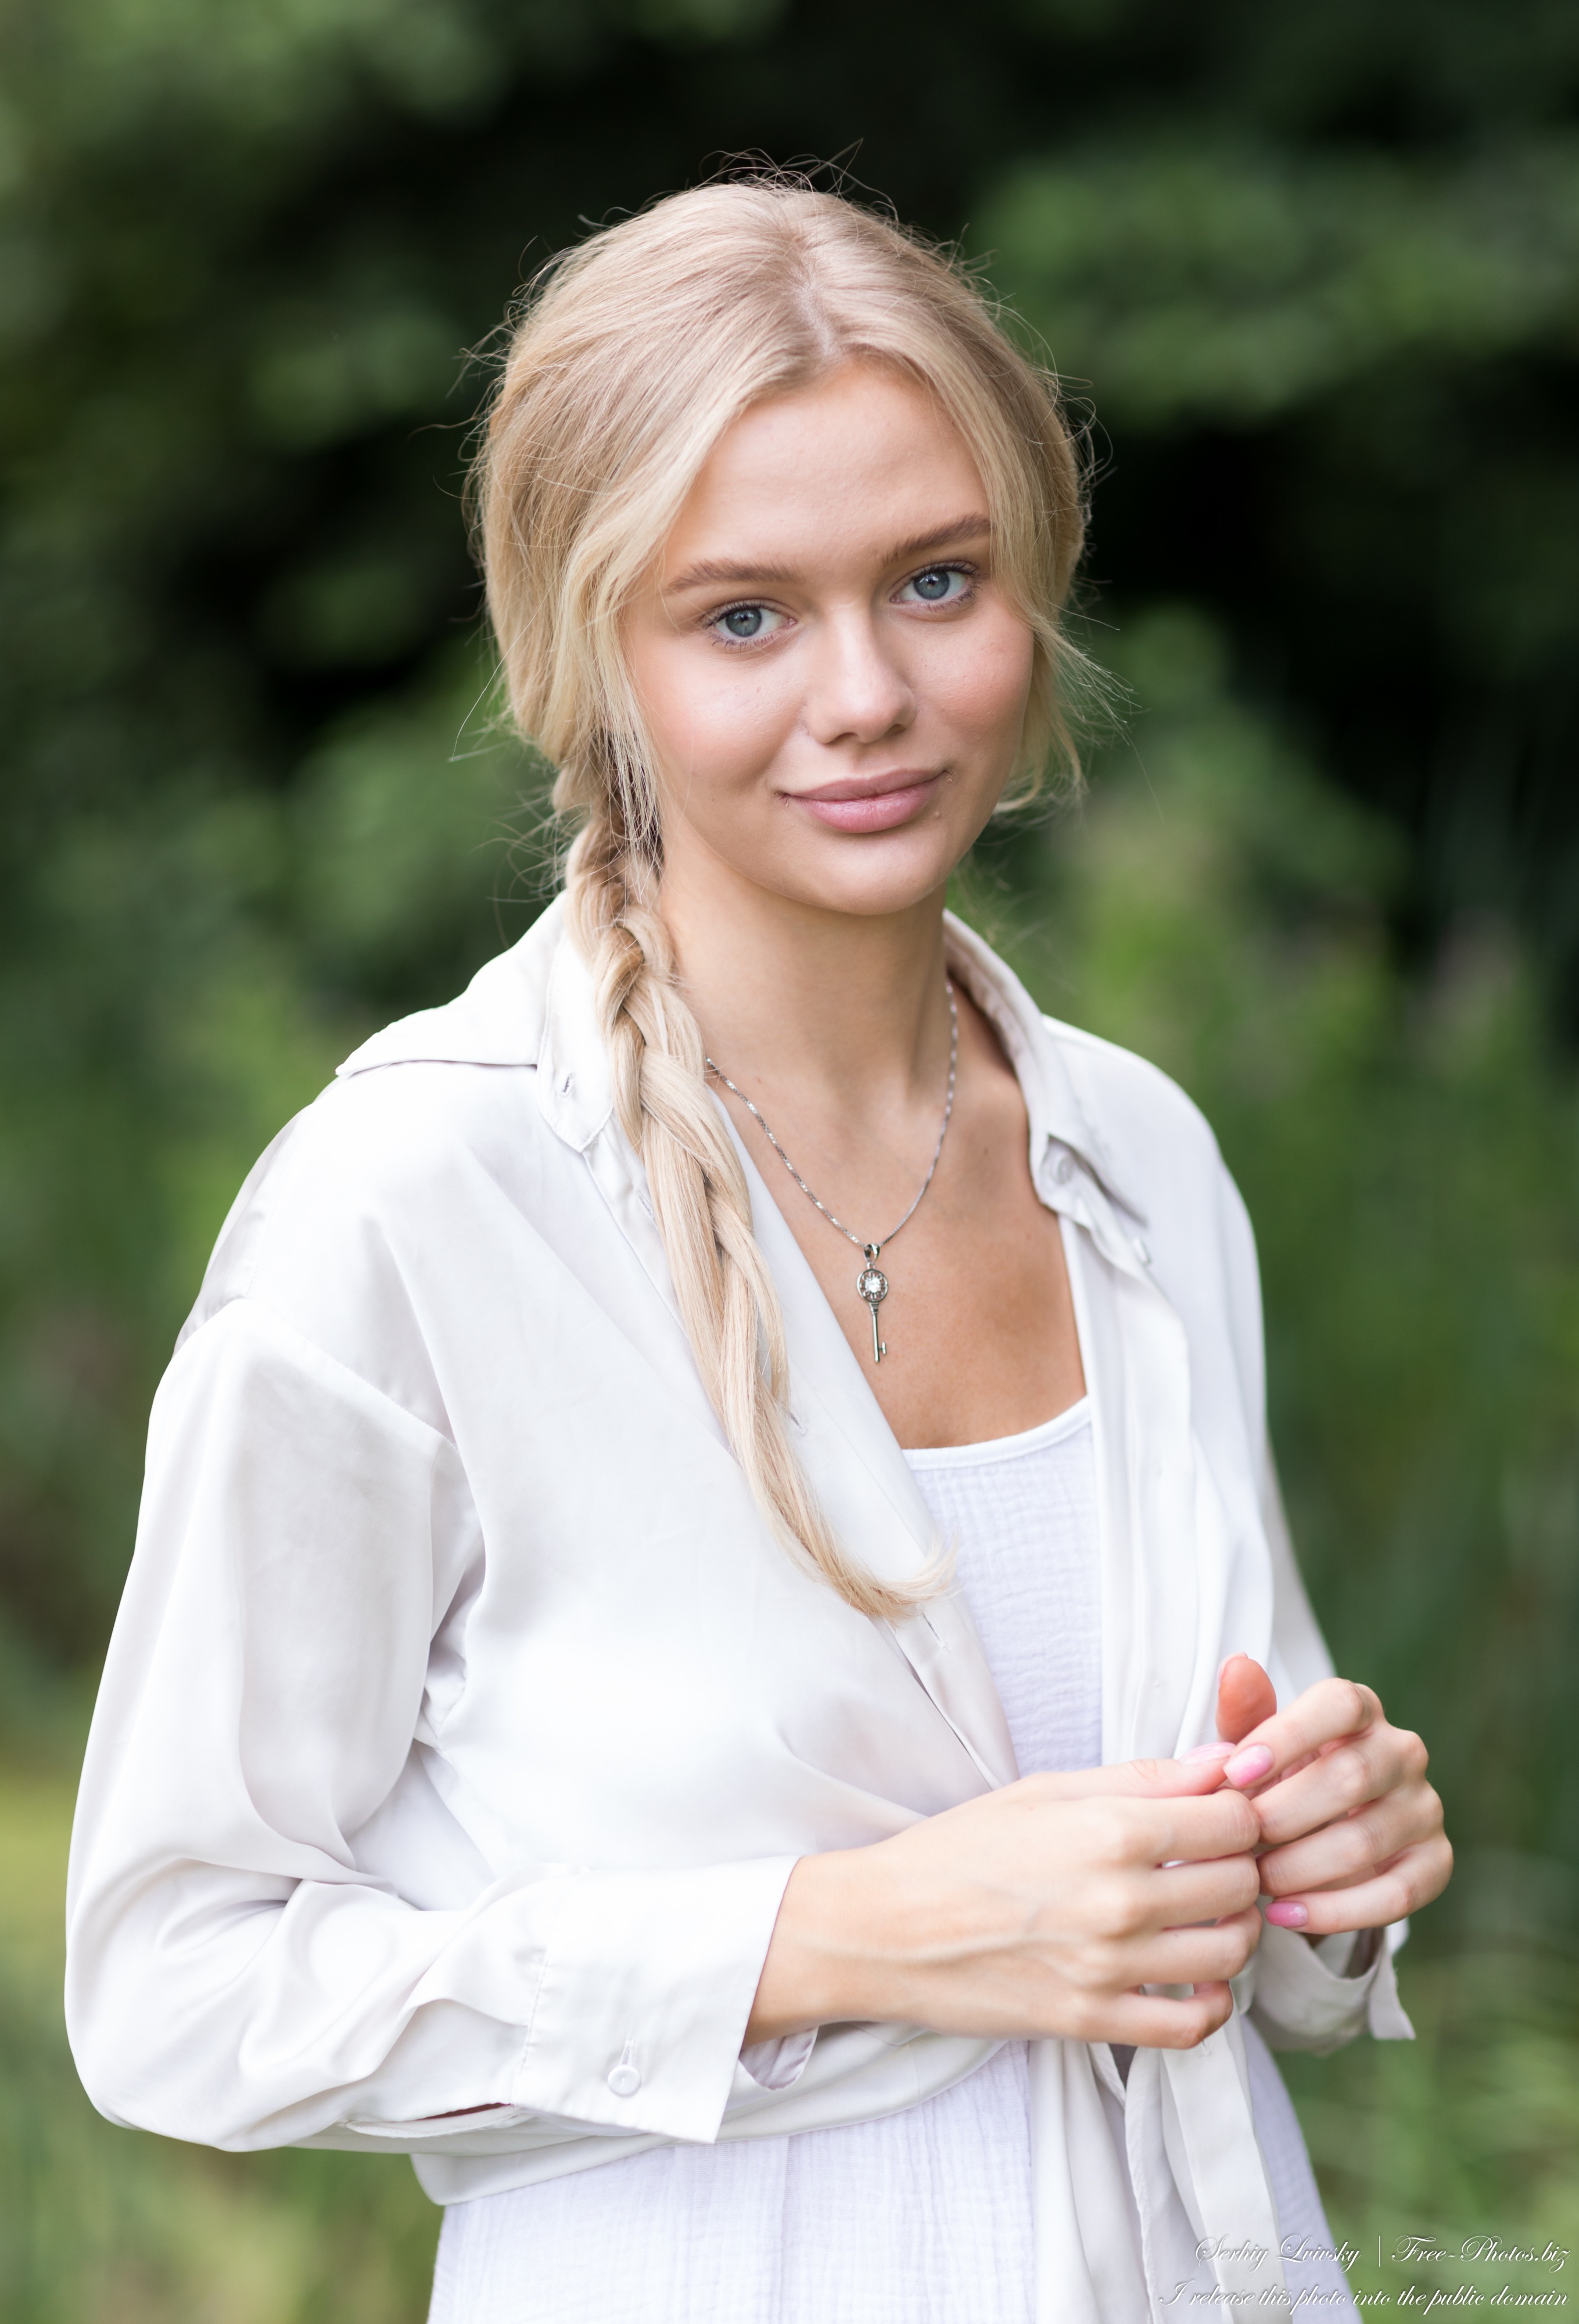 Oksana - a natural blonde 19-year-old girl photographed in July 2021 by Serhiy Lvivsky, picture 25